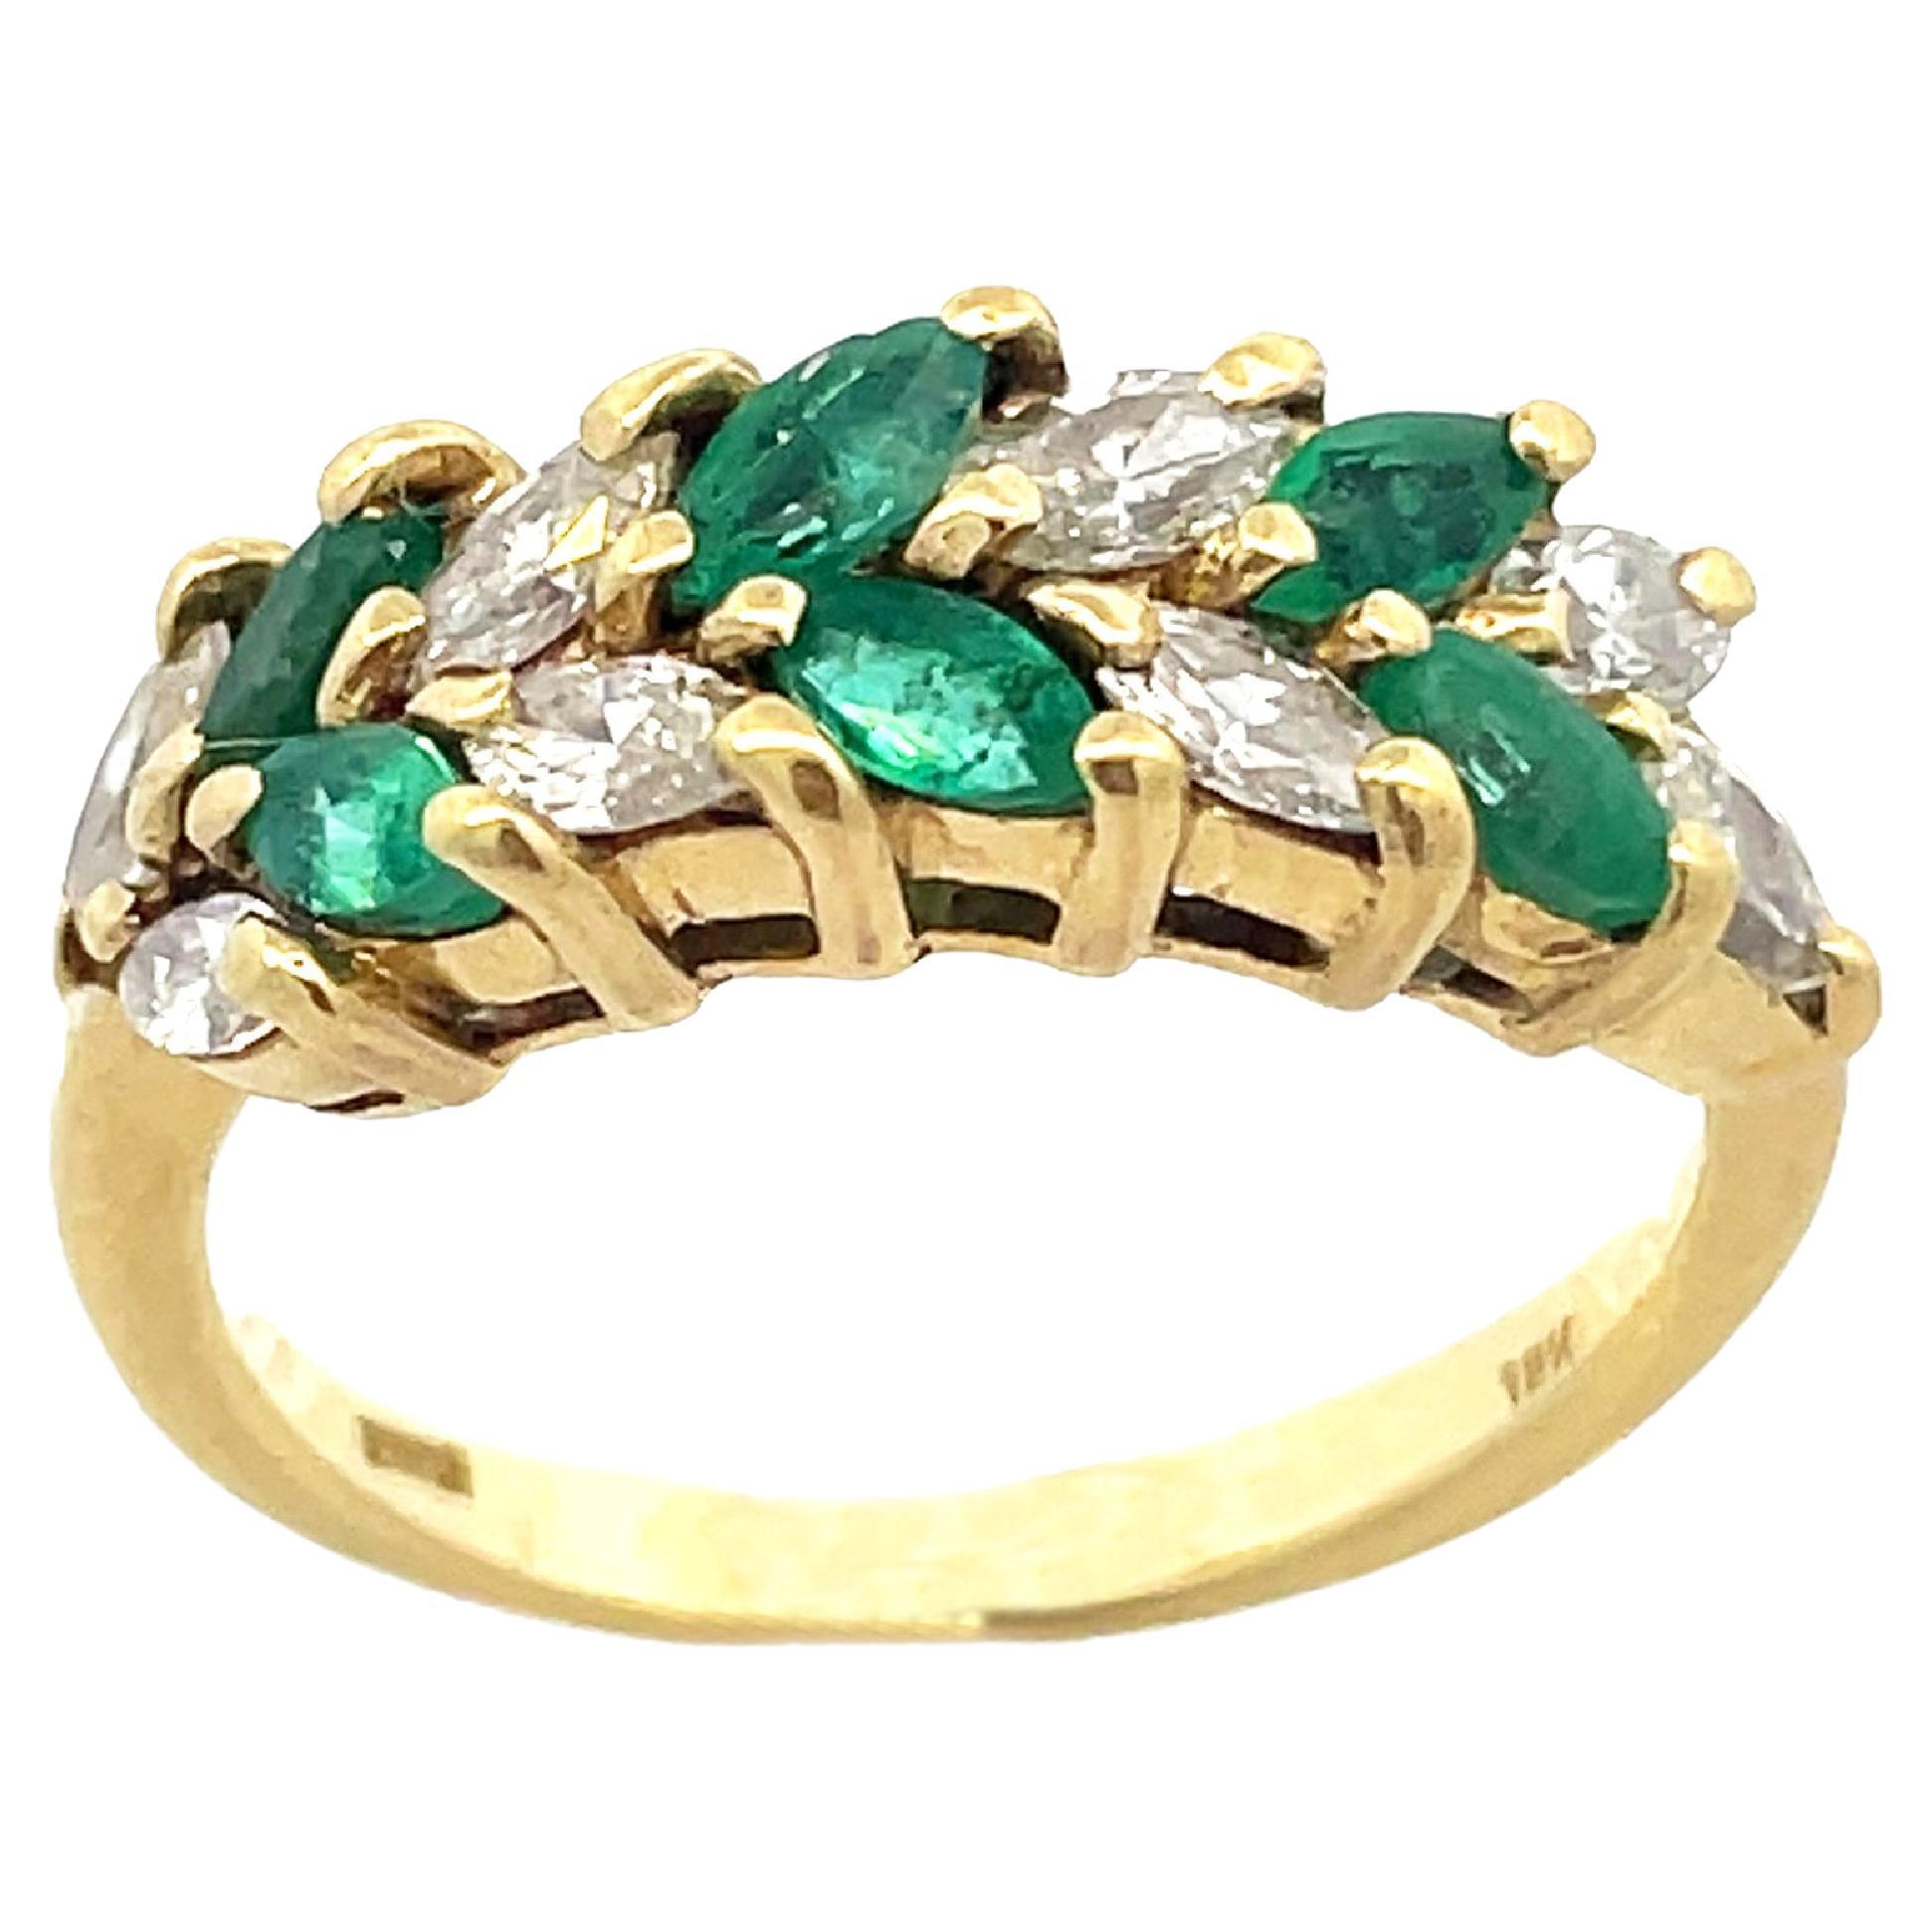 This is a breathtaking ring crafted in beaming 18K yellow gold that showcases a beautiful and sparkling duo of vivid green marquise emeralds and diamonds. With this nature-inspired ring, you can pique her attraction to the great outdoors. This